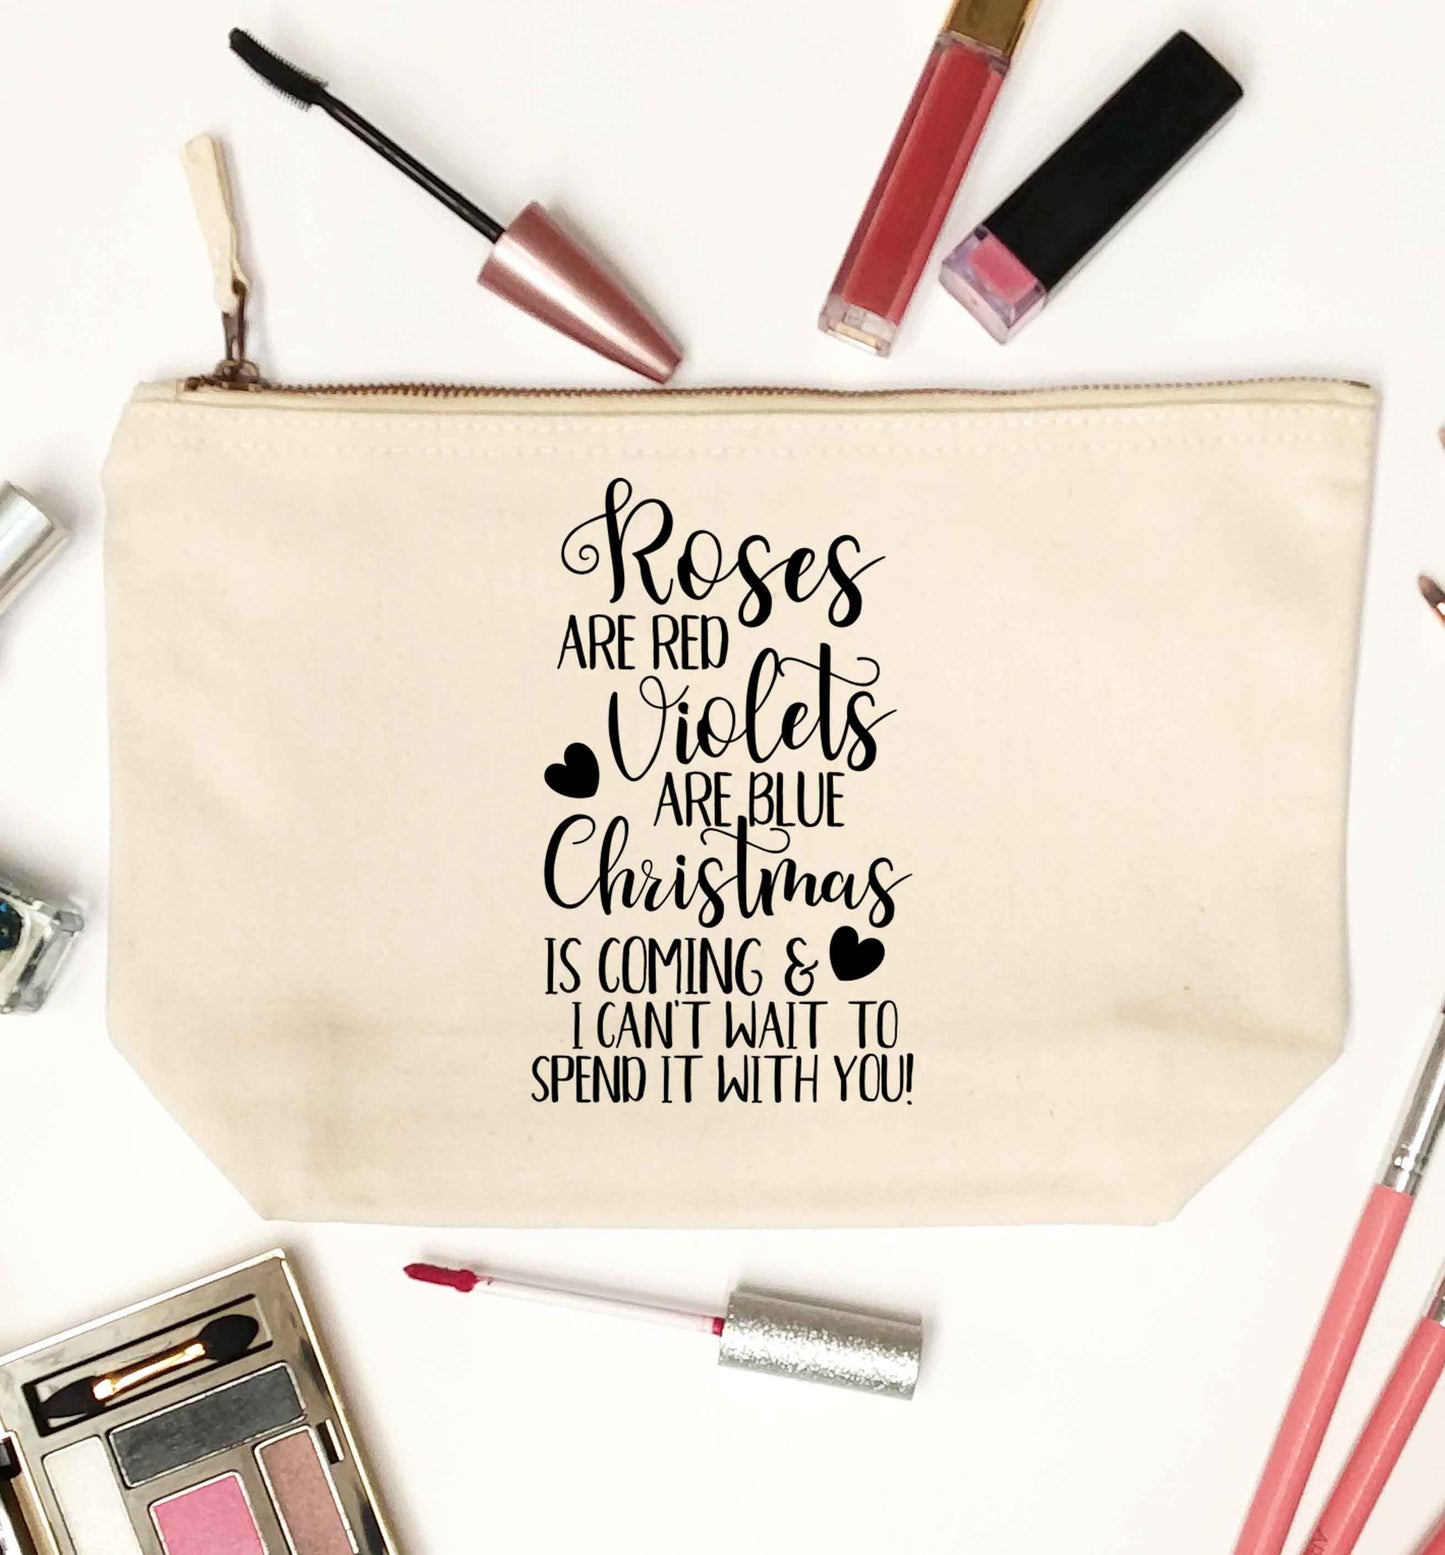 Roses are red violets are blue Christmas is coming and I can't wait to spend it with you natural makeup bag